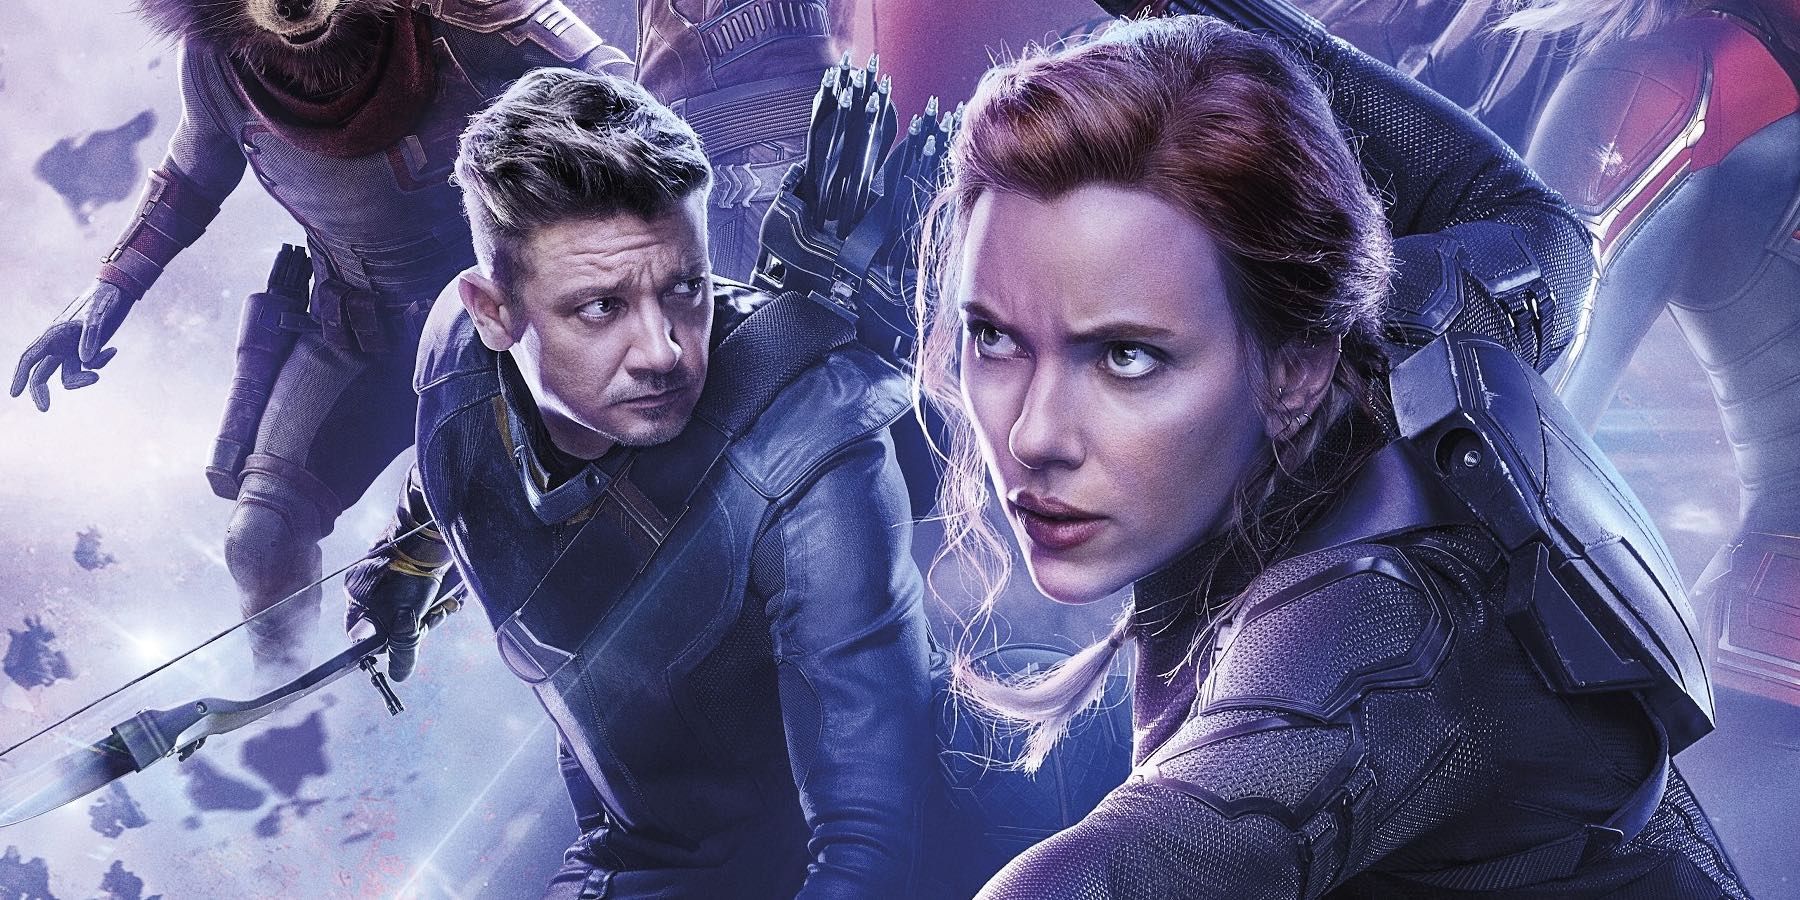 Black Widow and Hawkeye in the Avengers: Endgame poster